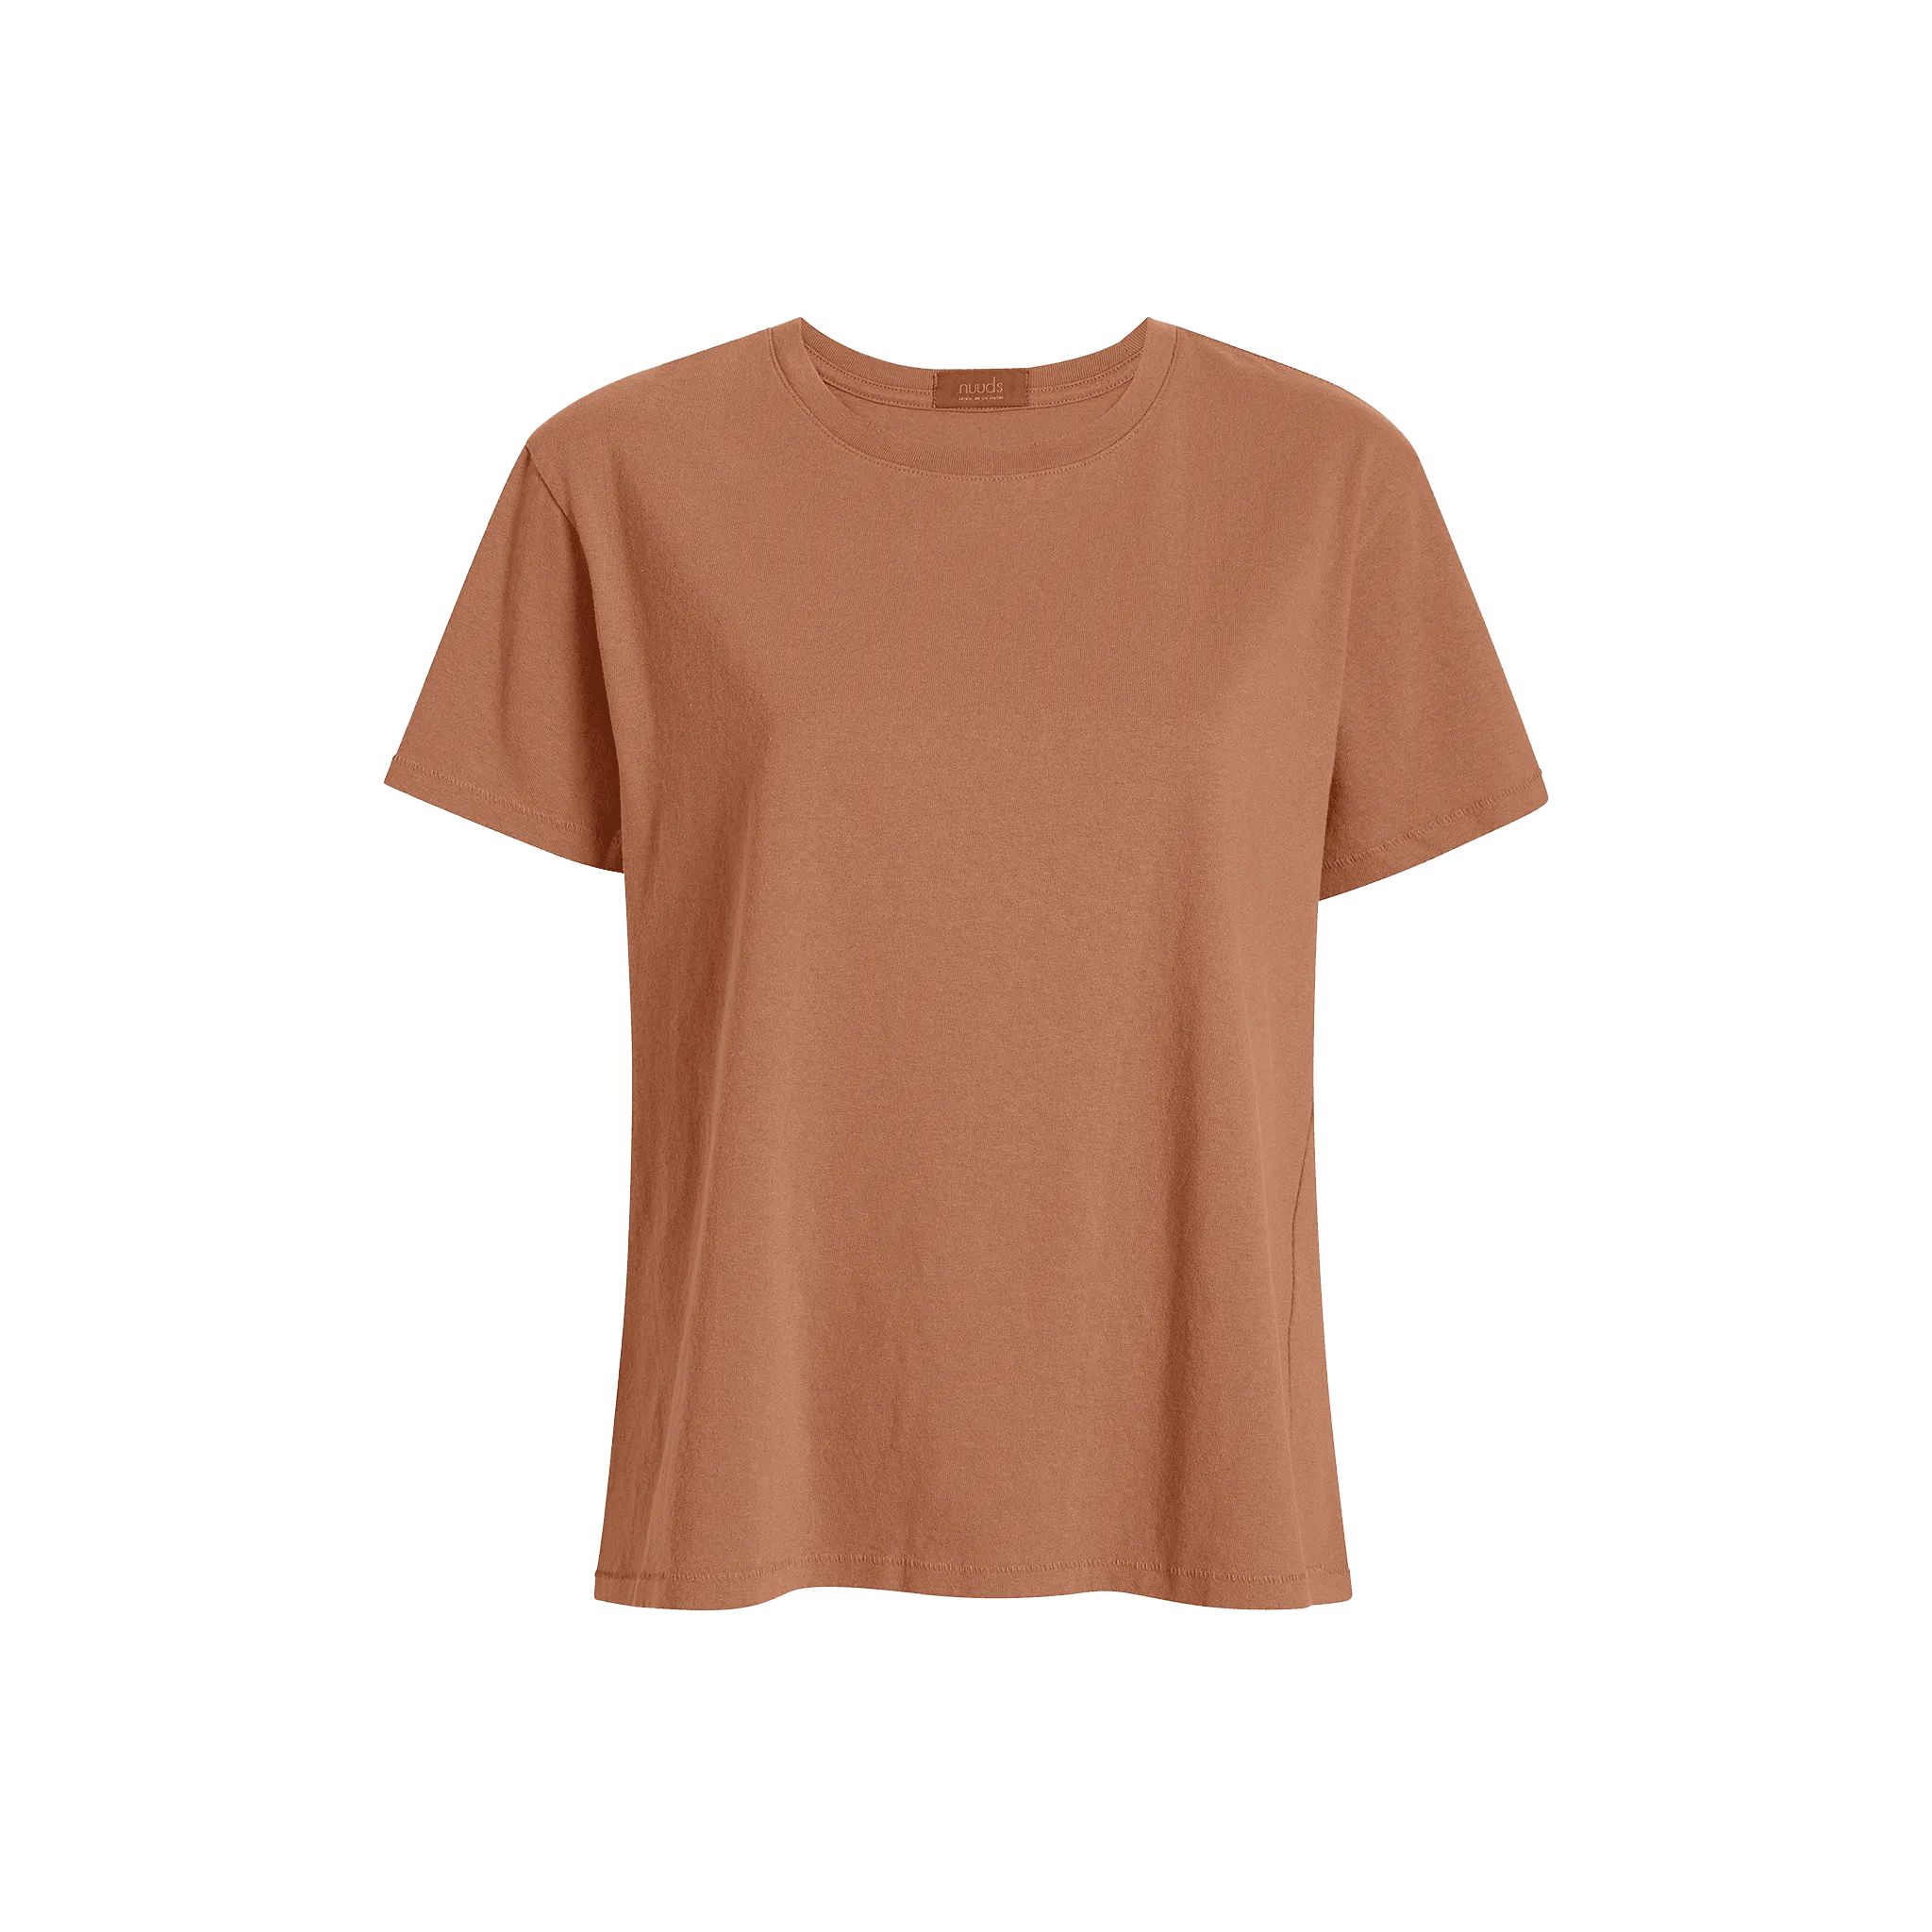 Women's Everyday T-Shirt - Clay - nuuds | nuuds